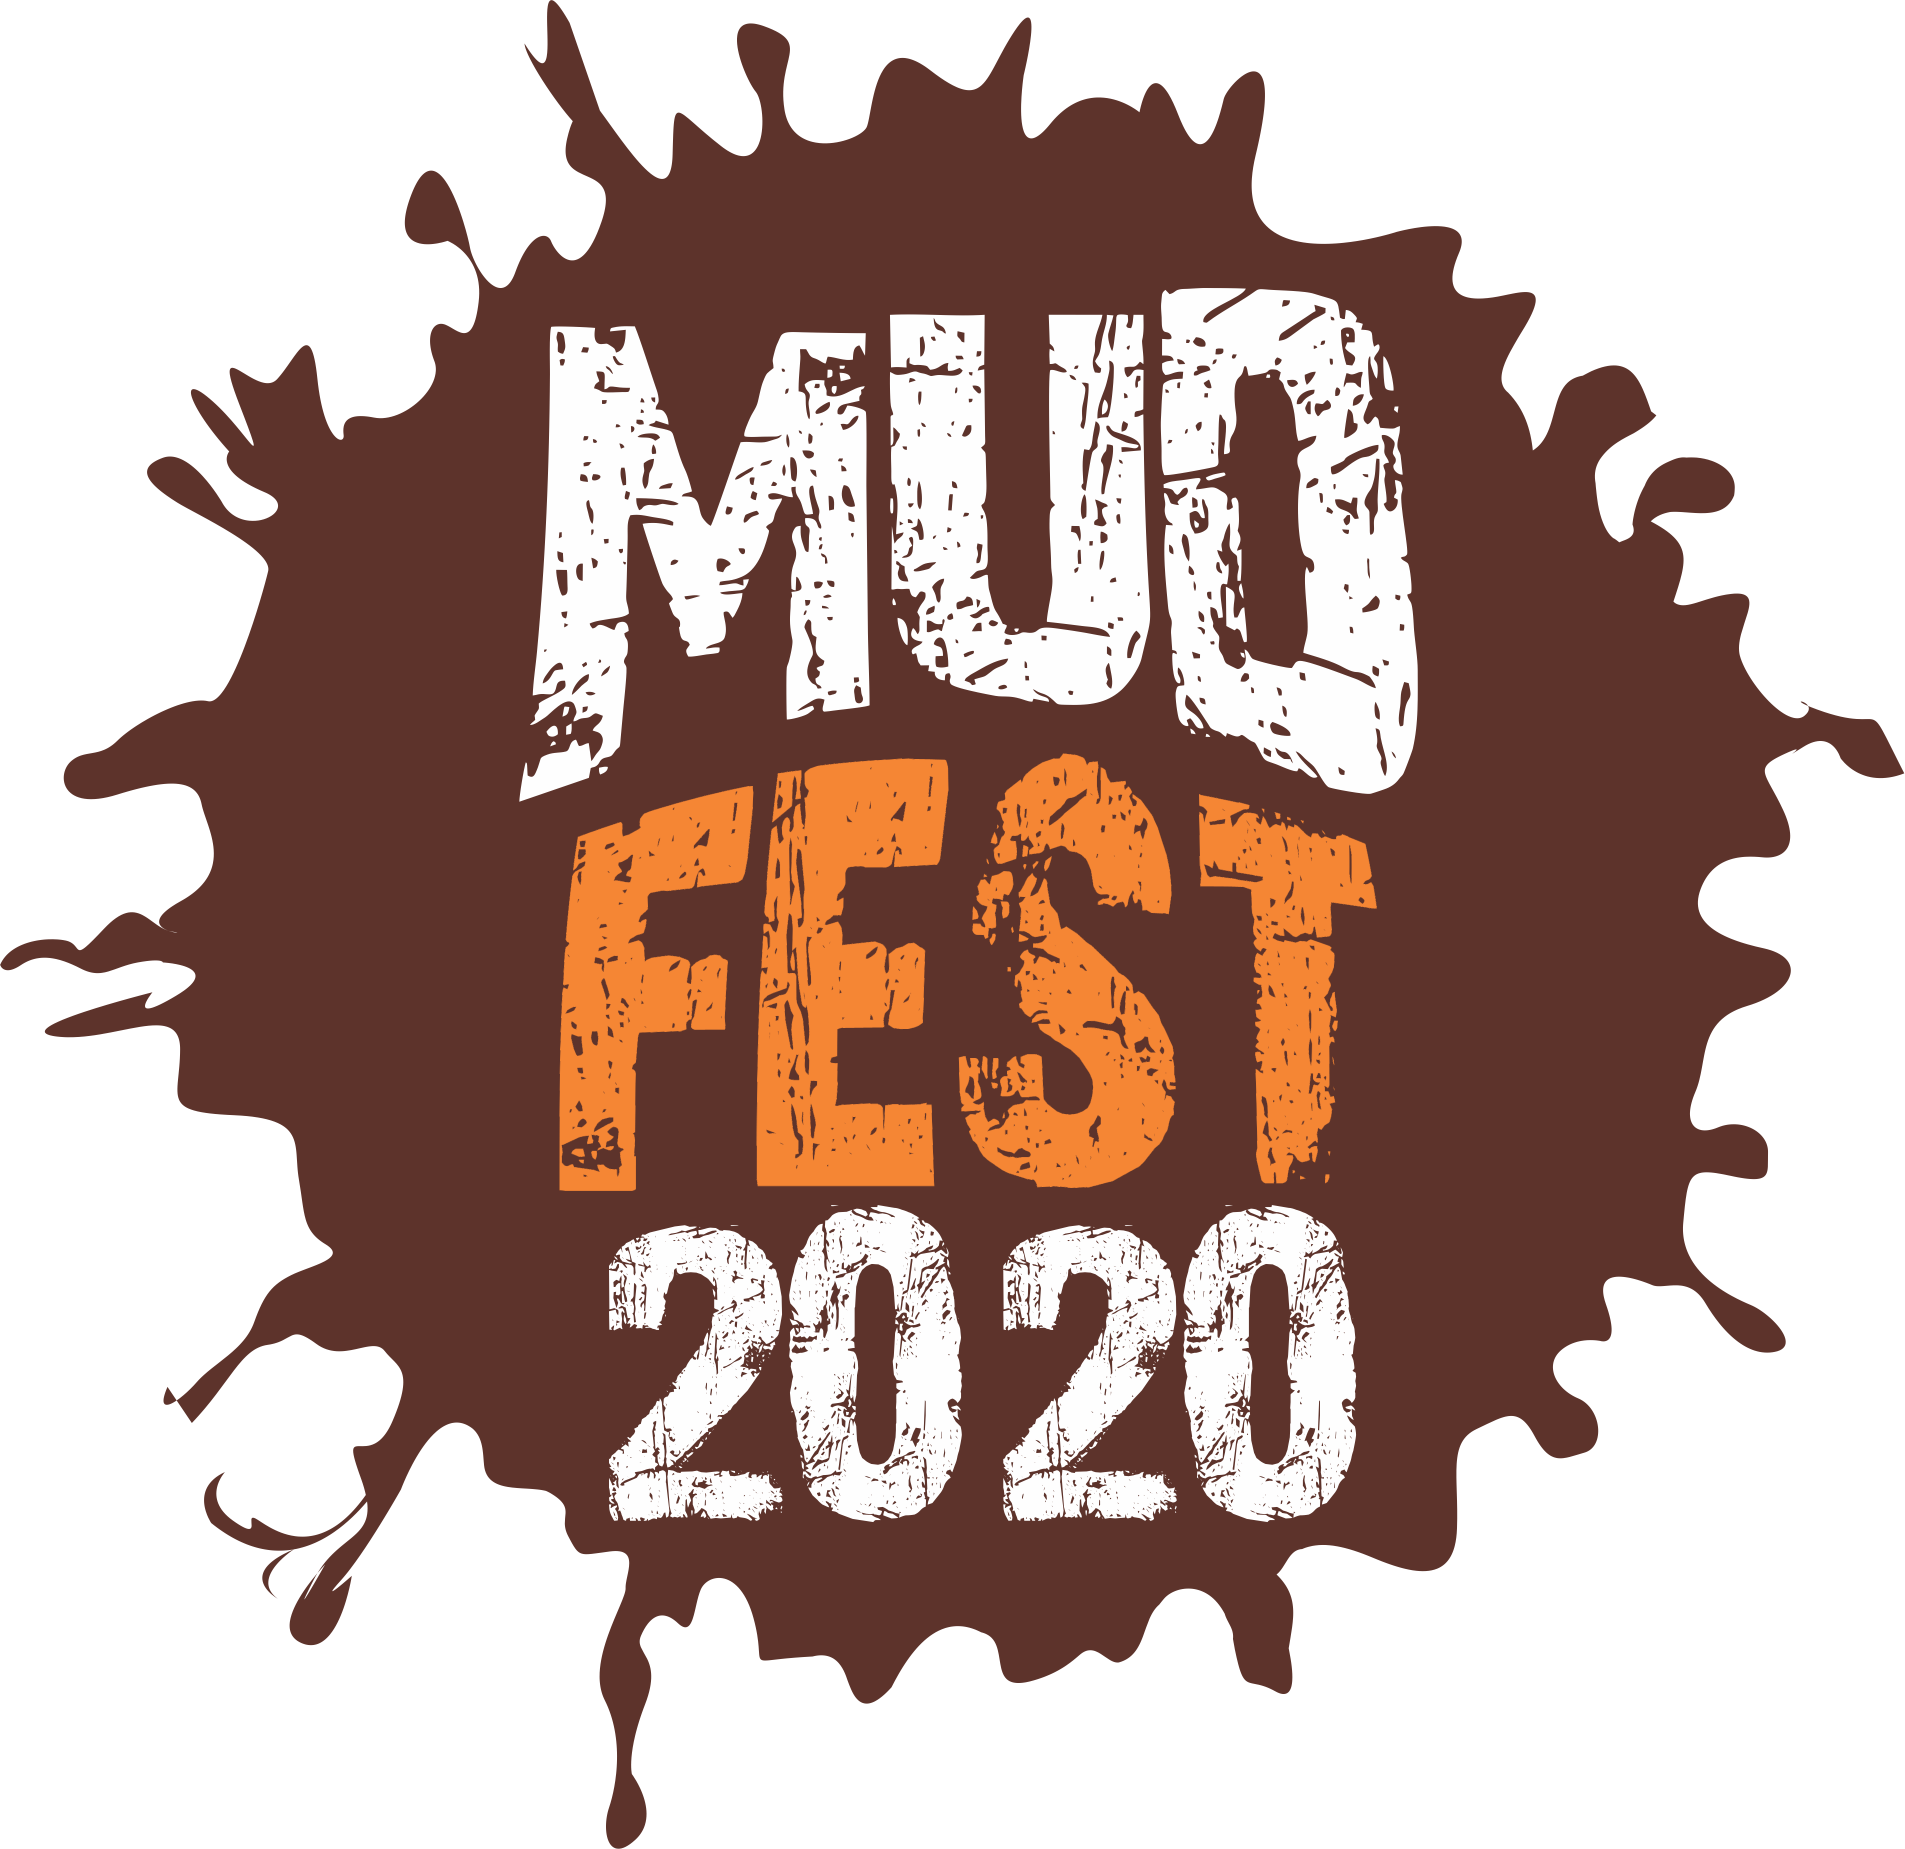 About Mudfest Mud Fest